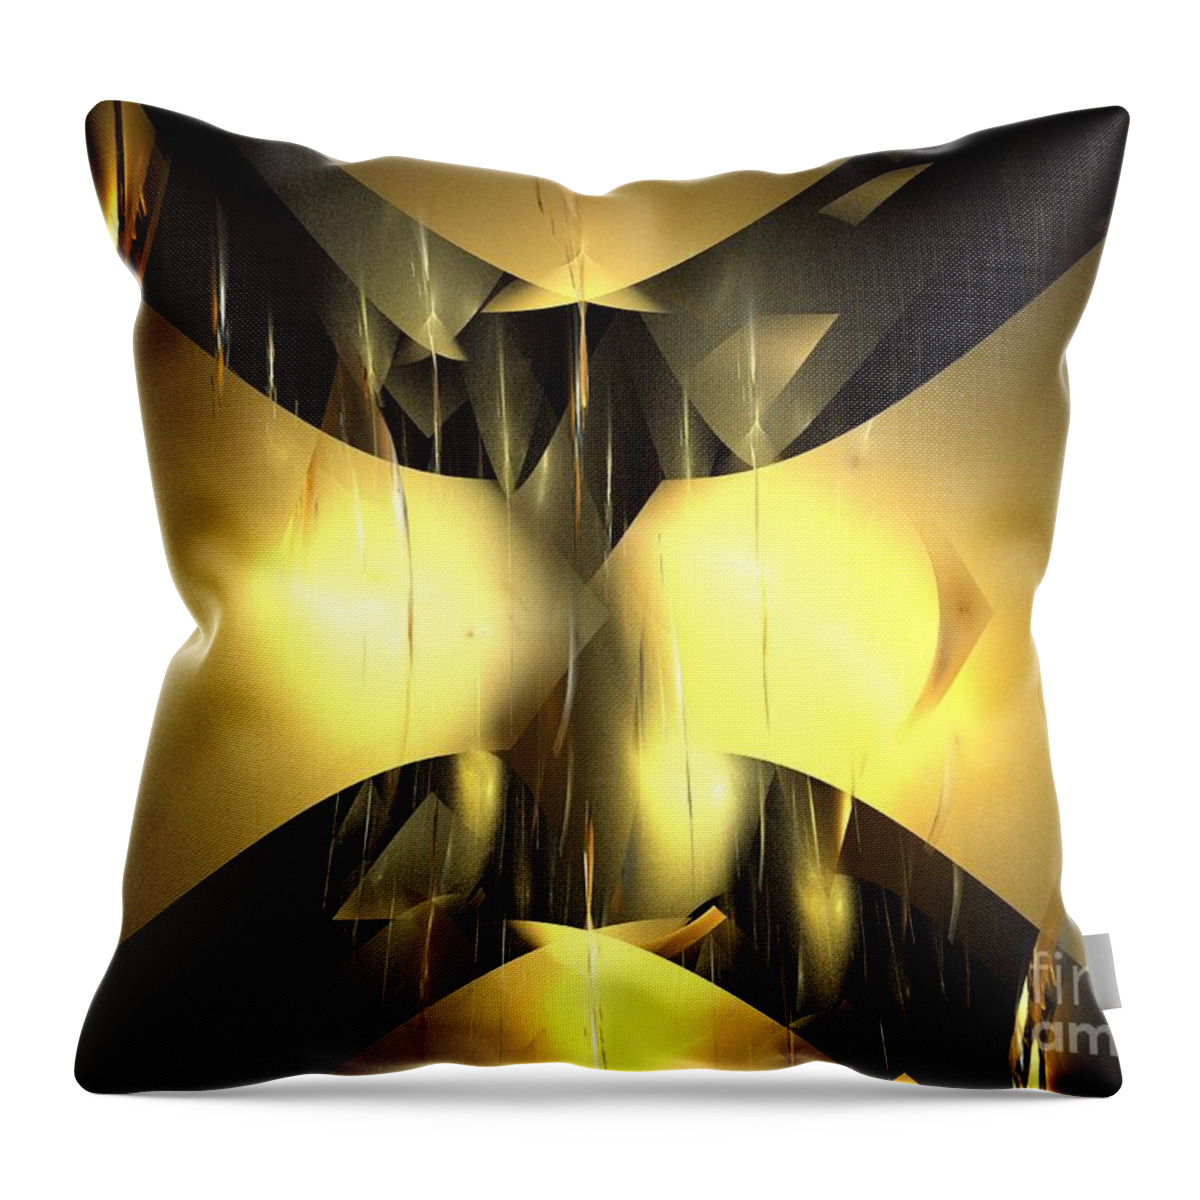  Gold Pattern Throw Pillow featuring the digital art Armour by Kim Sy Ok